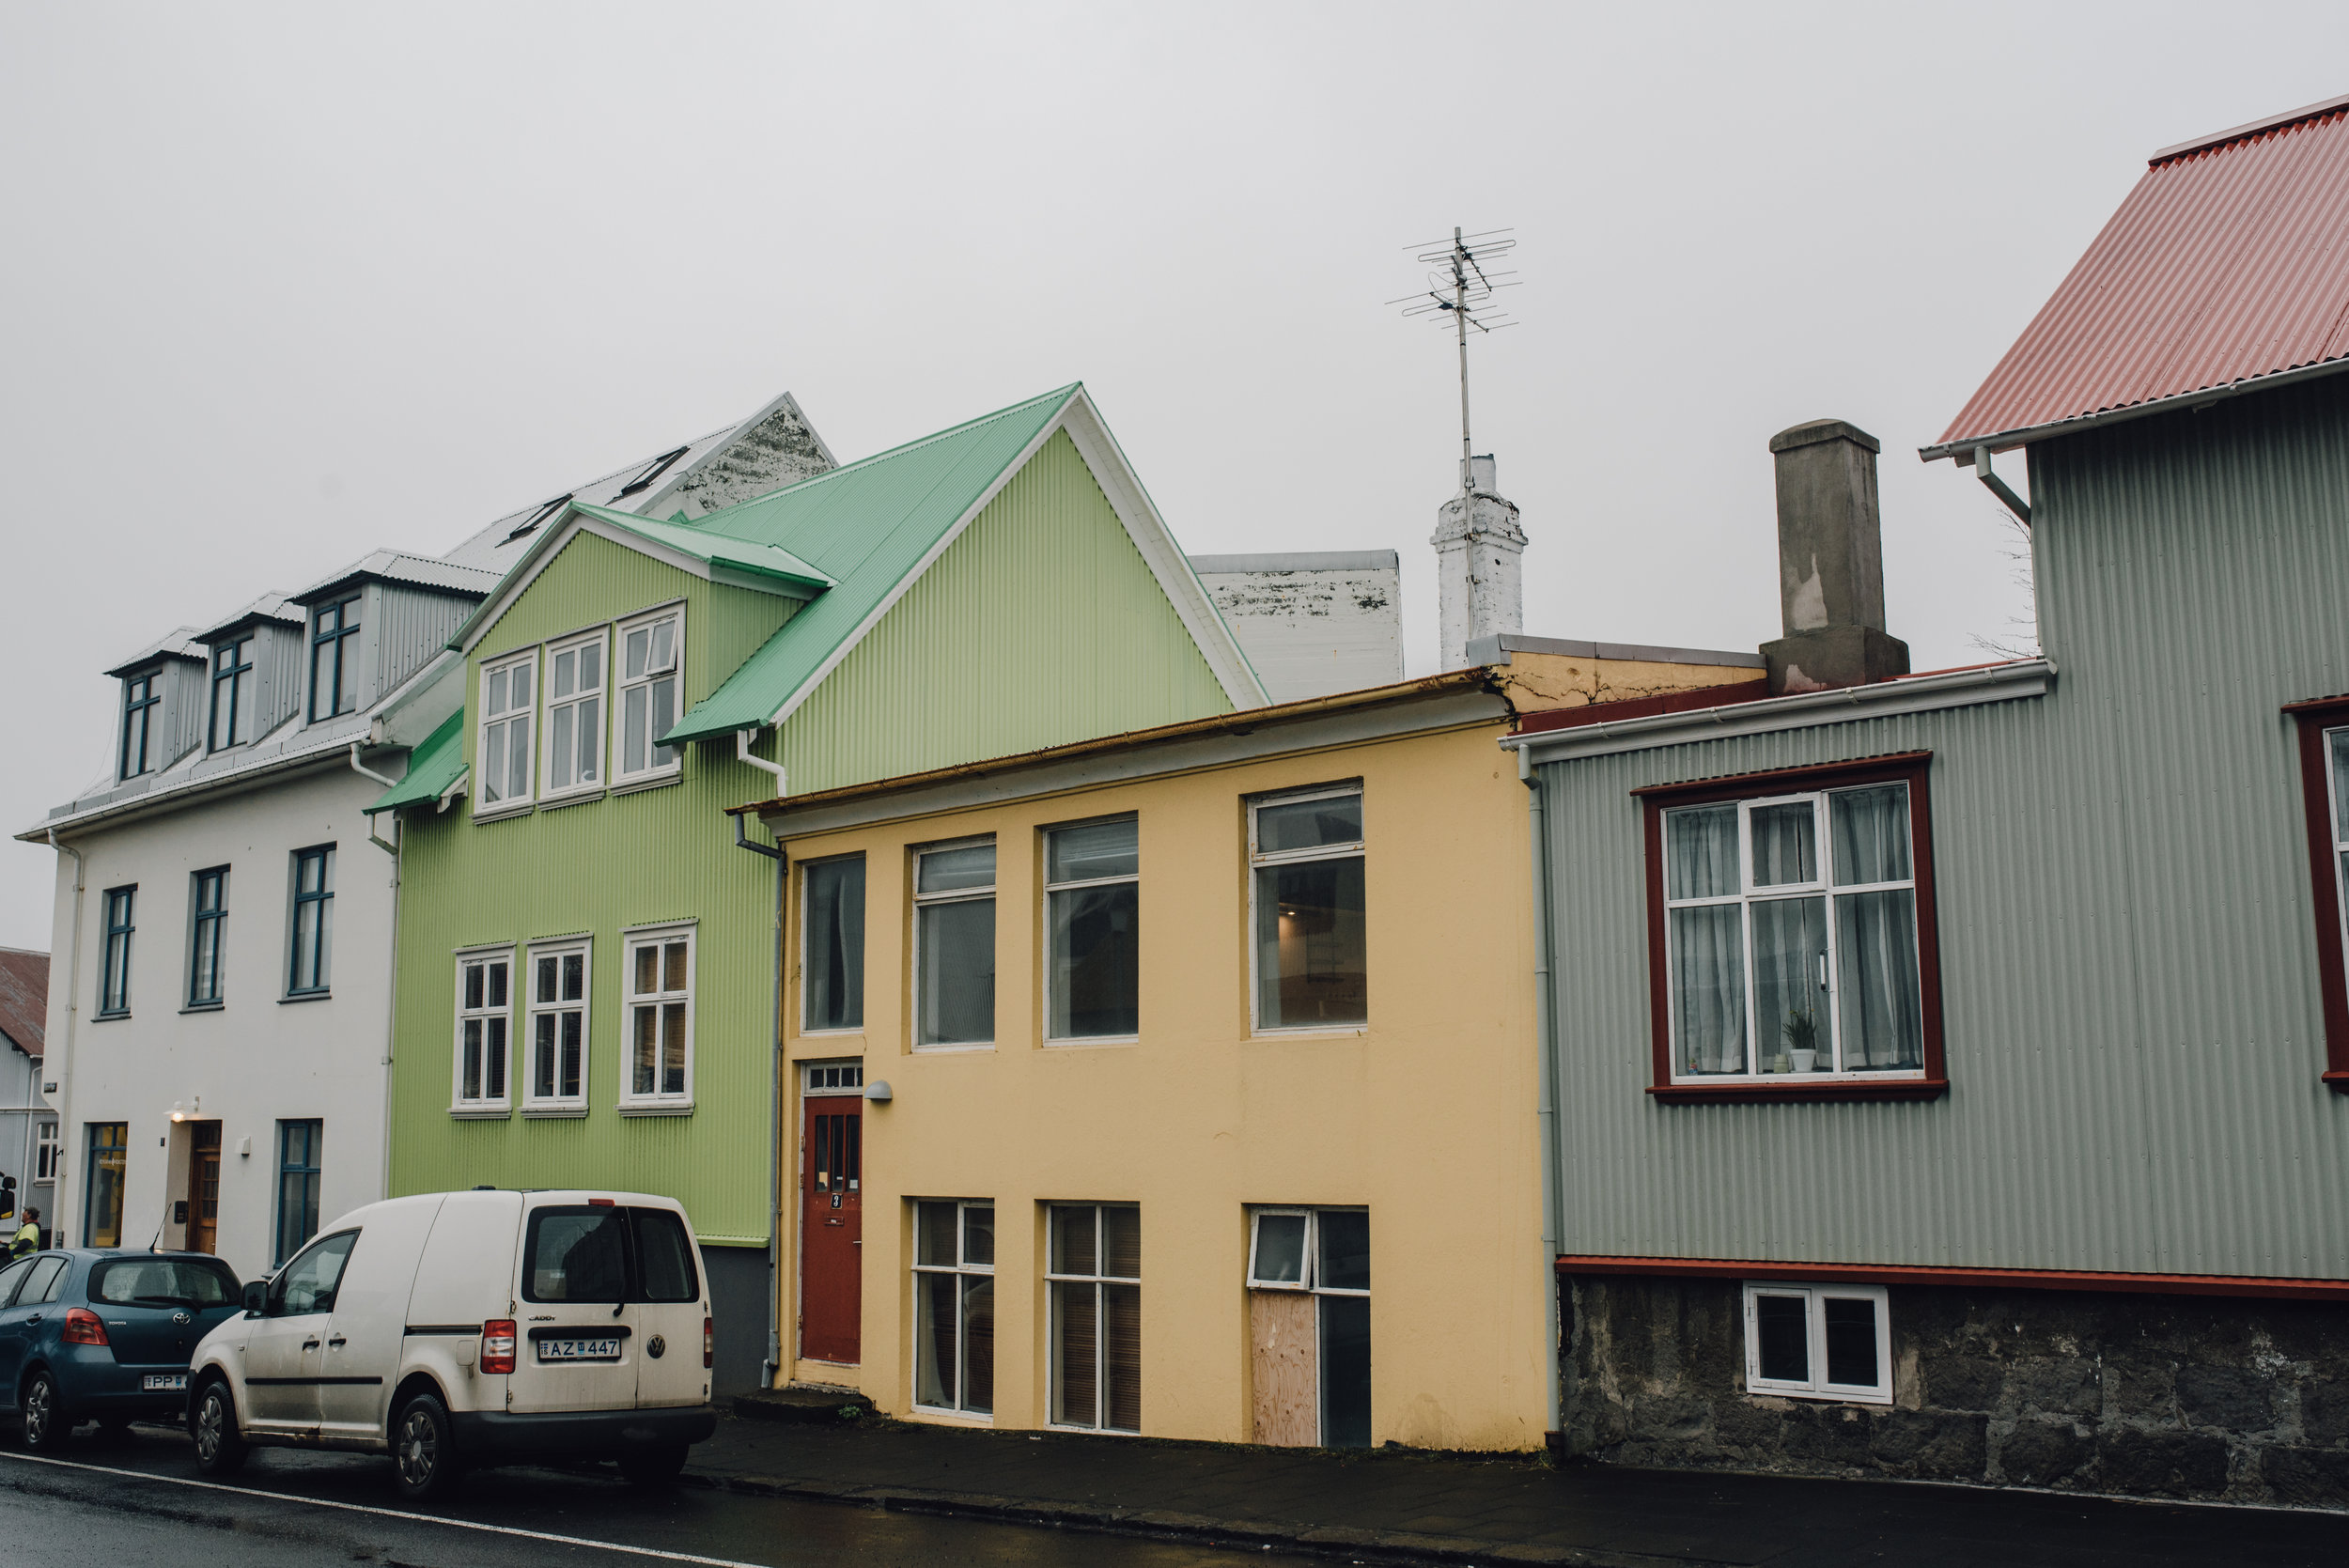 Main and Simple Photography_2017_Travel_April_ICELAND0410-54.jpg